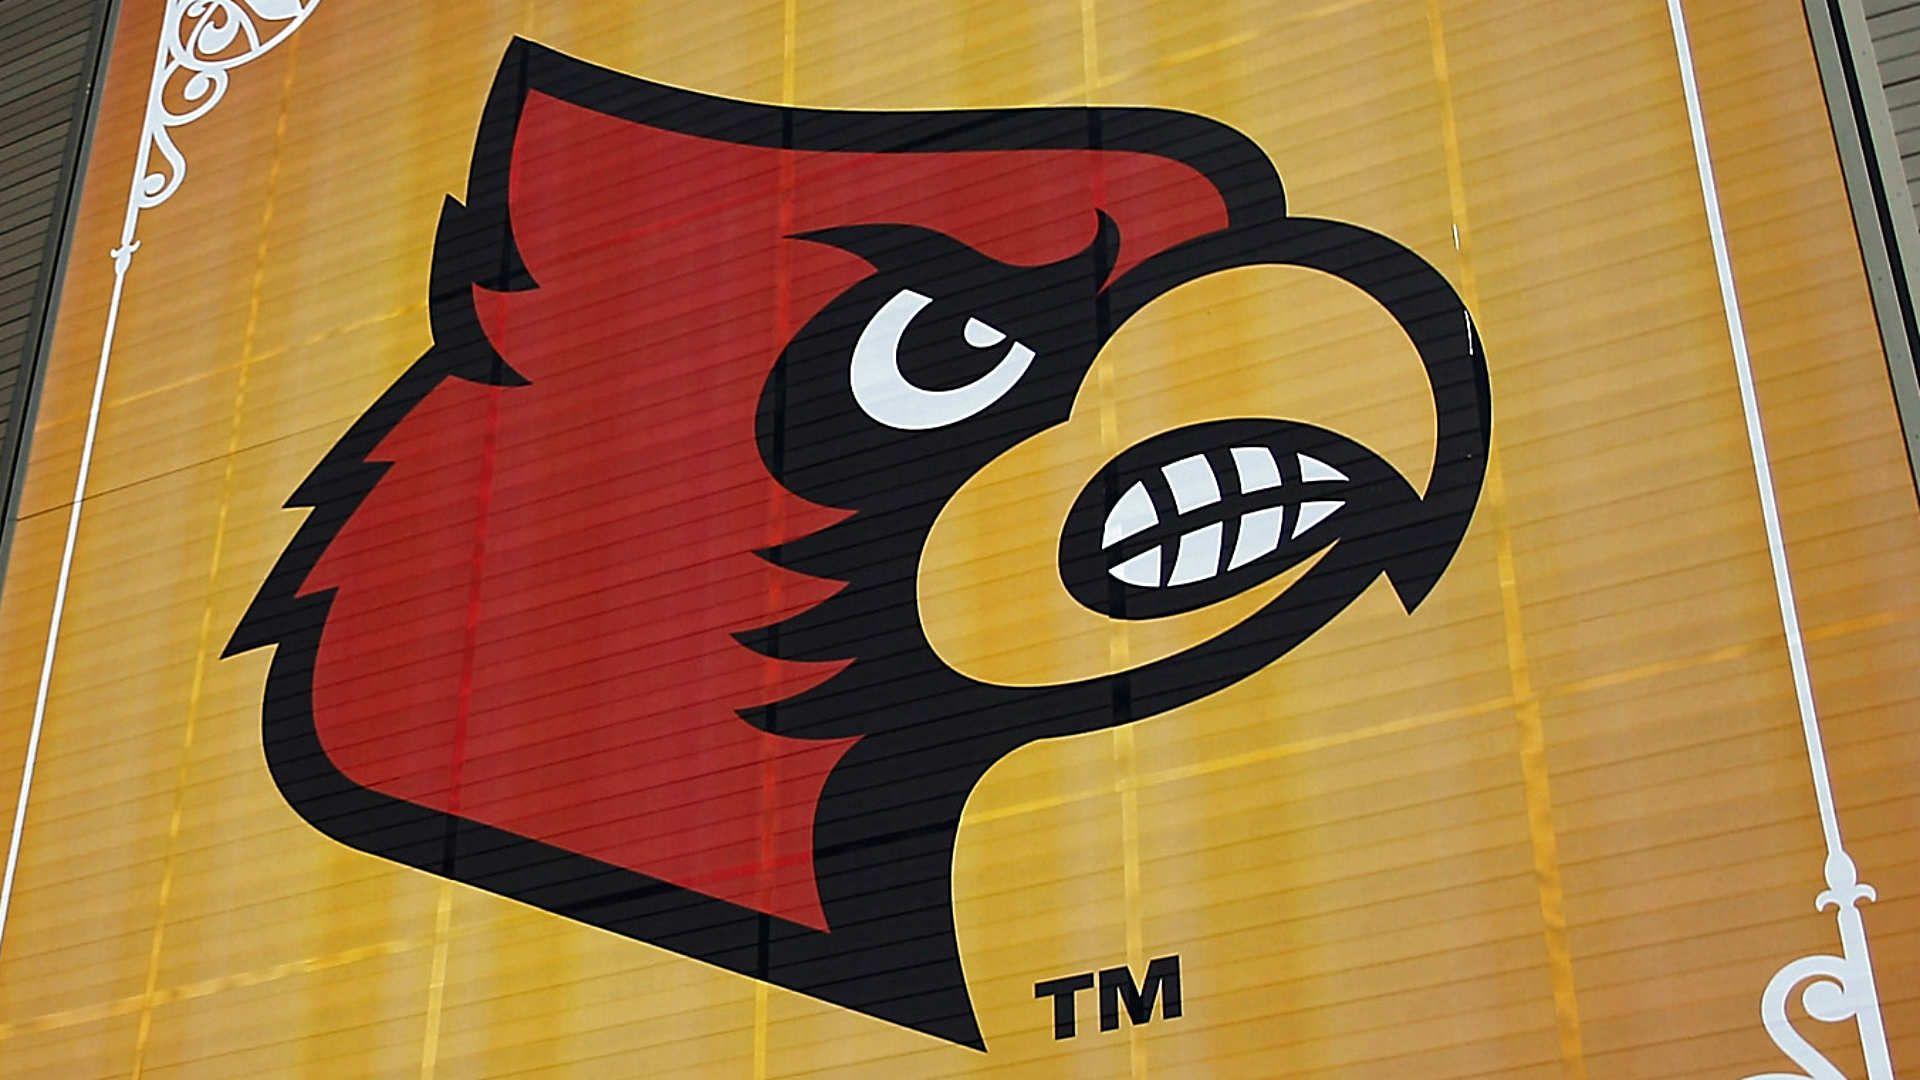 U of L Basketball Logo - Former Louisville players acknowledge stripper parties, admit to ...